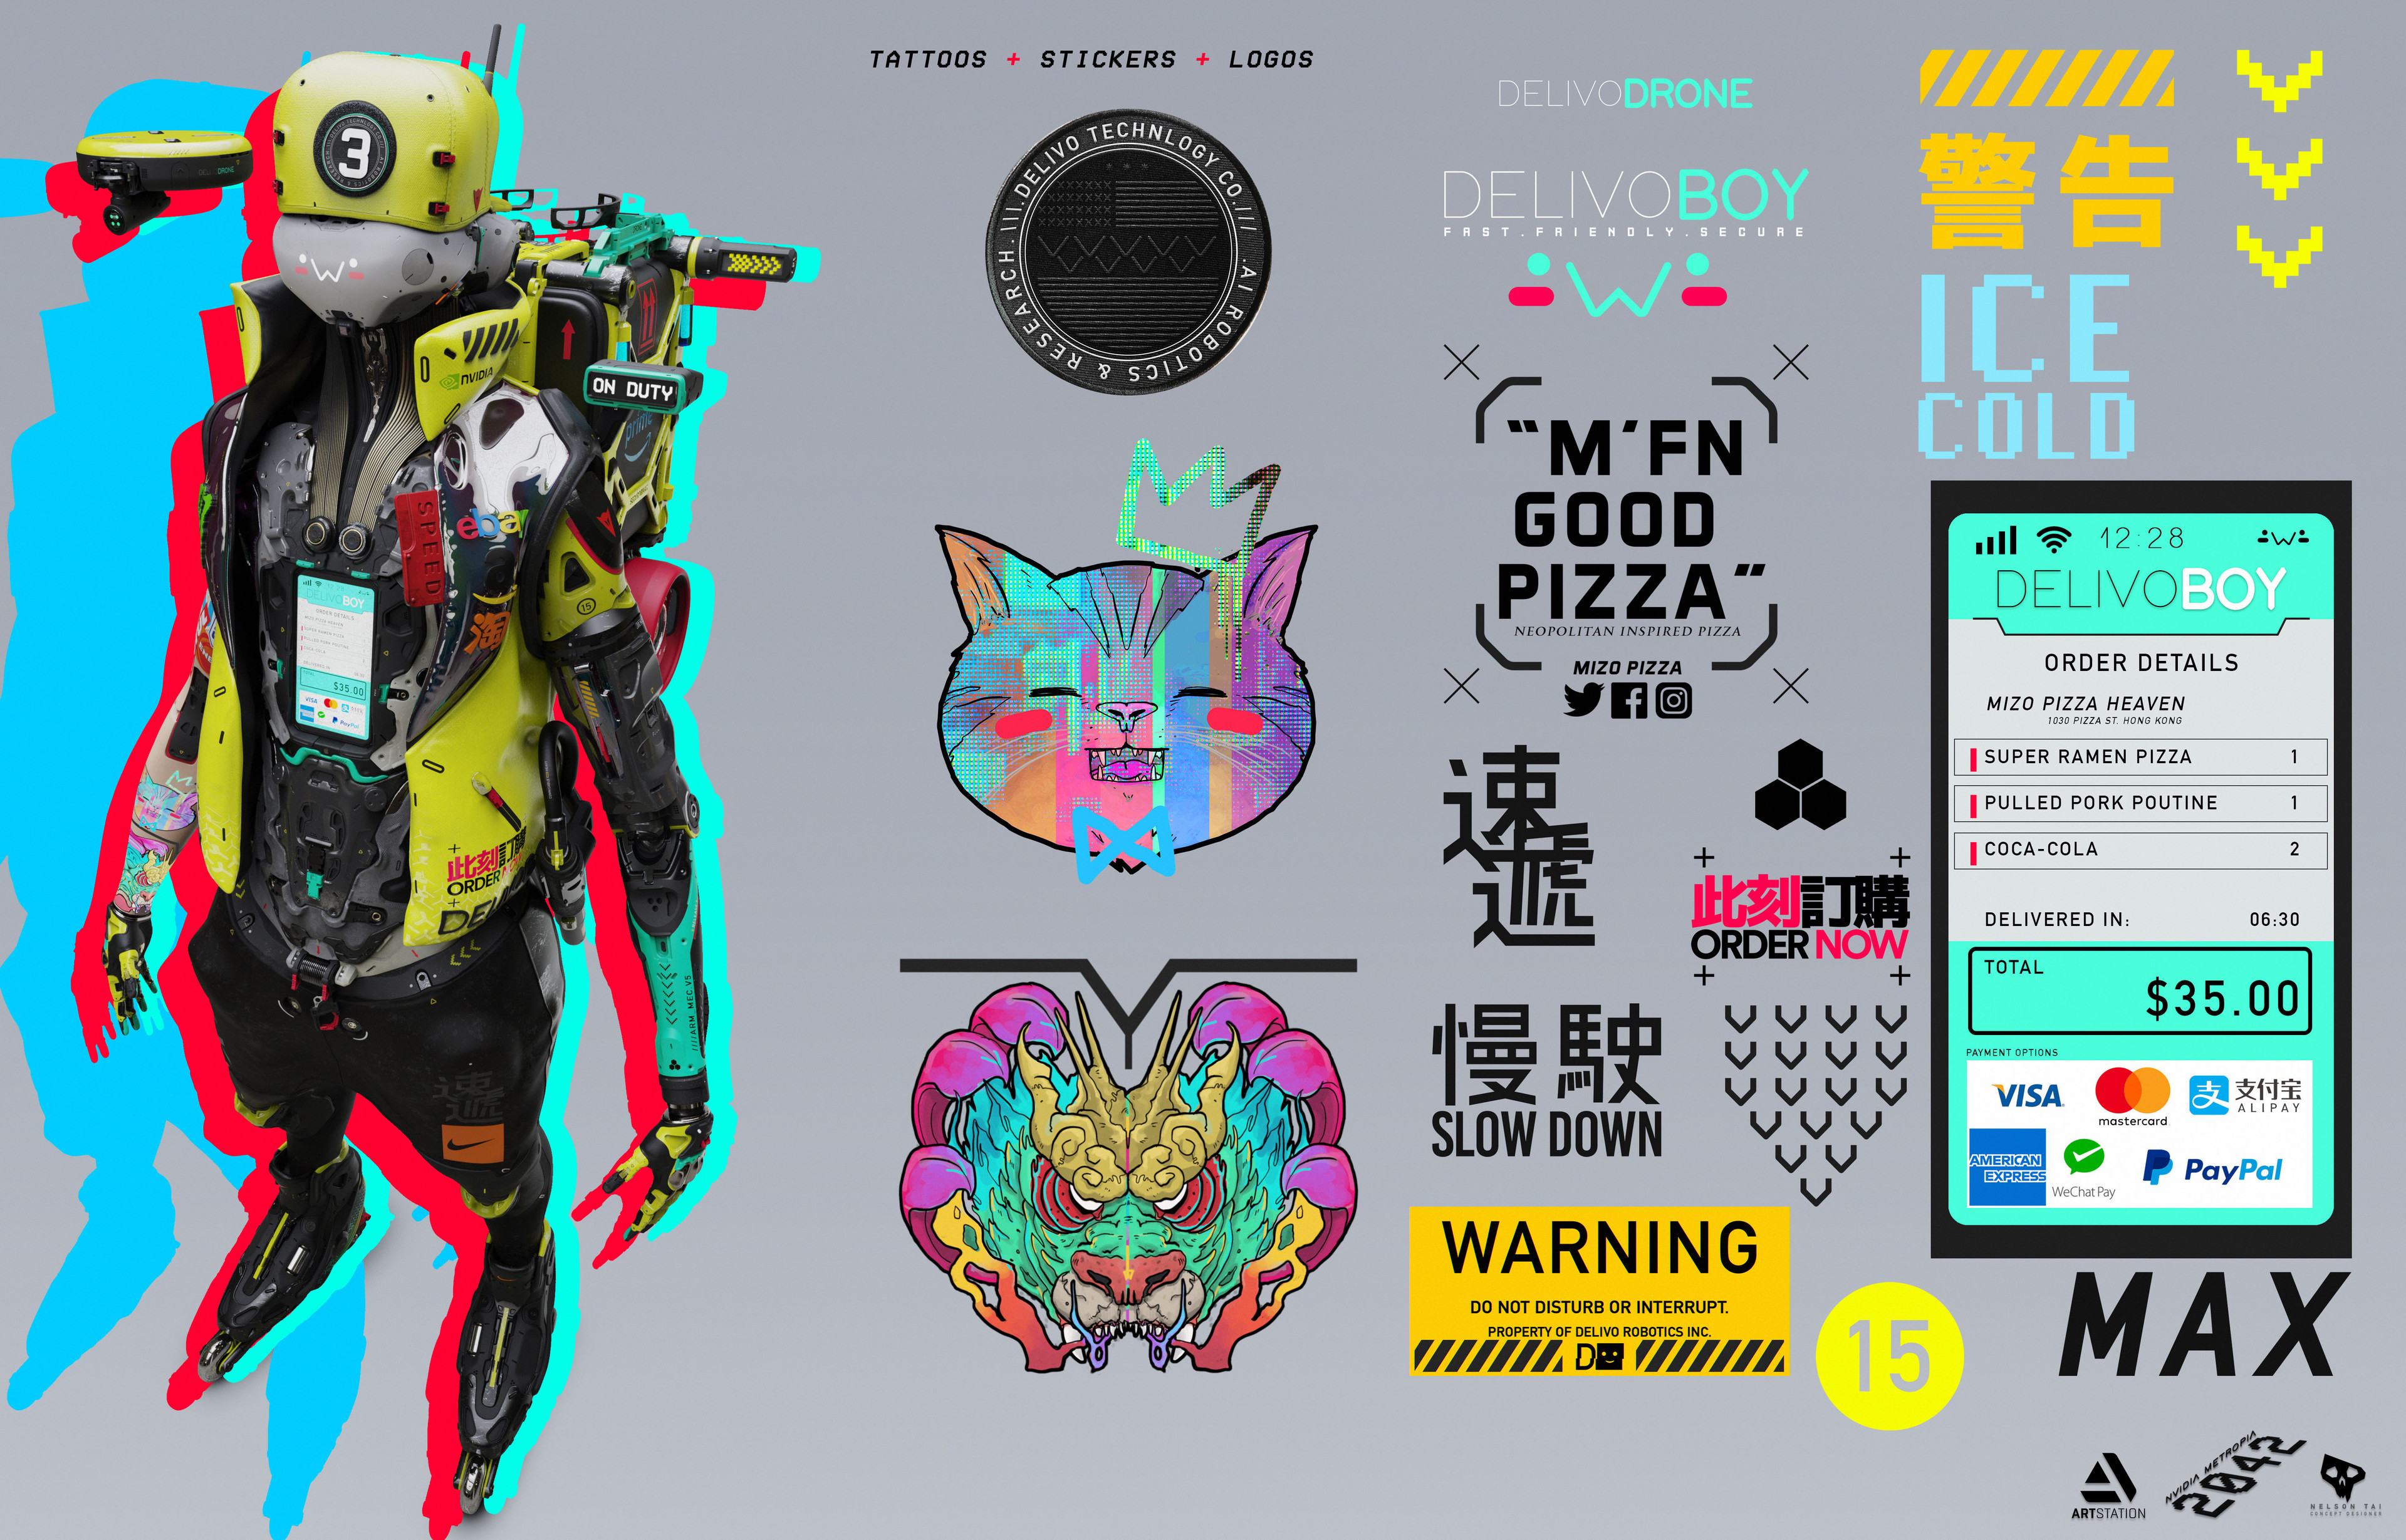 Tattoos, stickers, and UI on DelivoBoy!